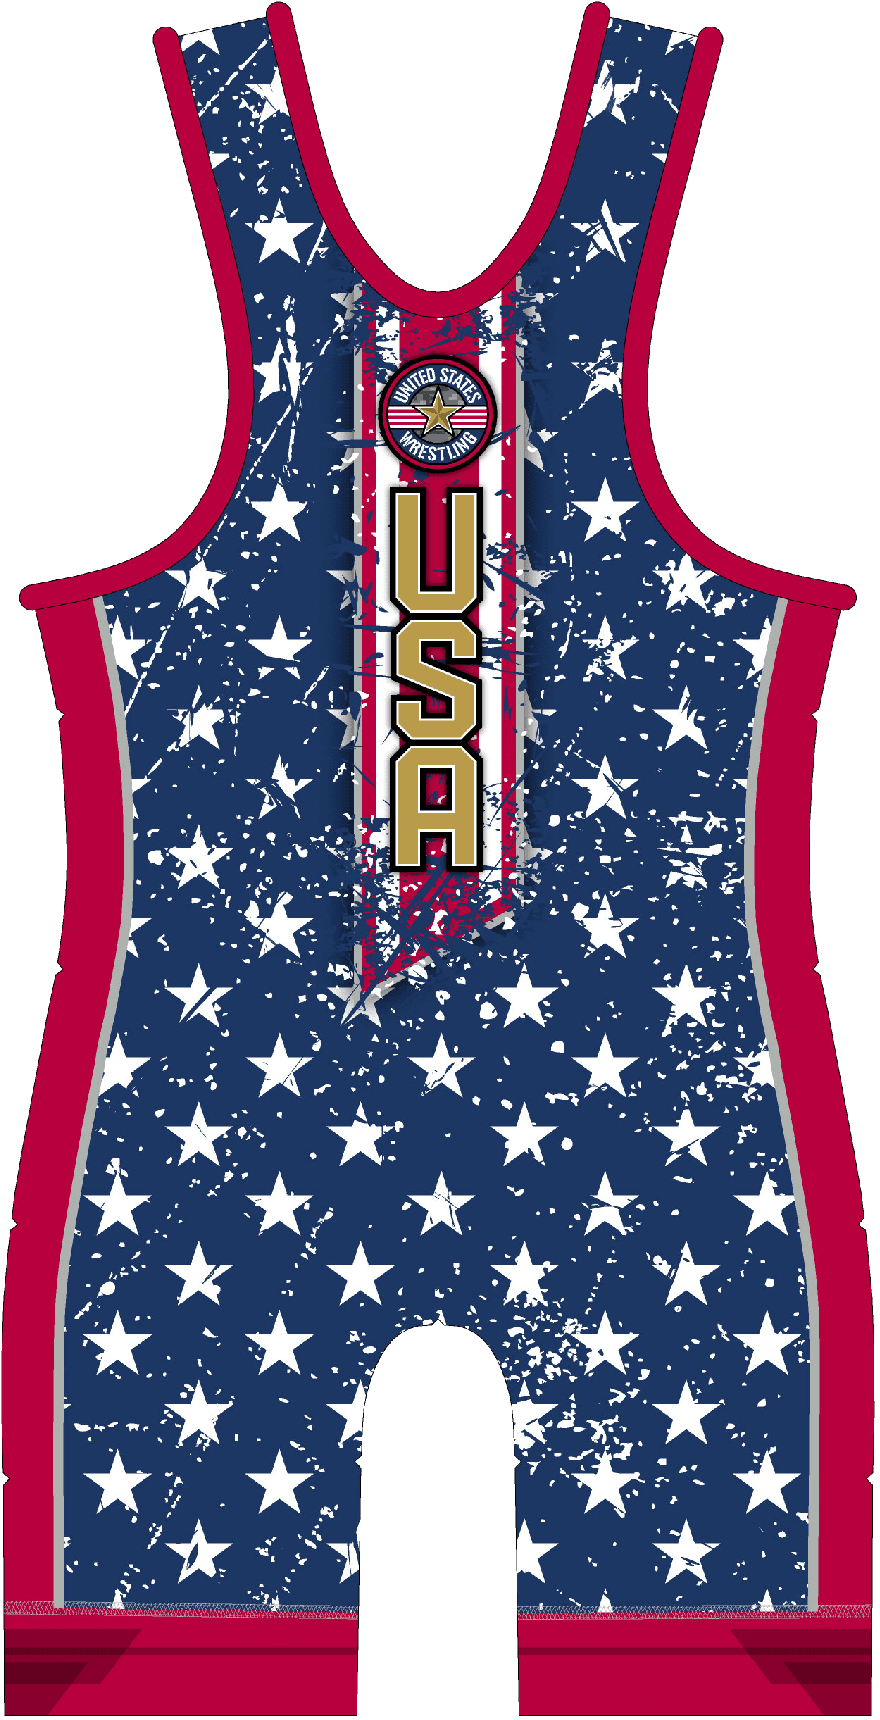 Stars And Stripes Sublimated - Stars And Stripes Sublimated (1800x1800)